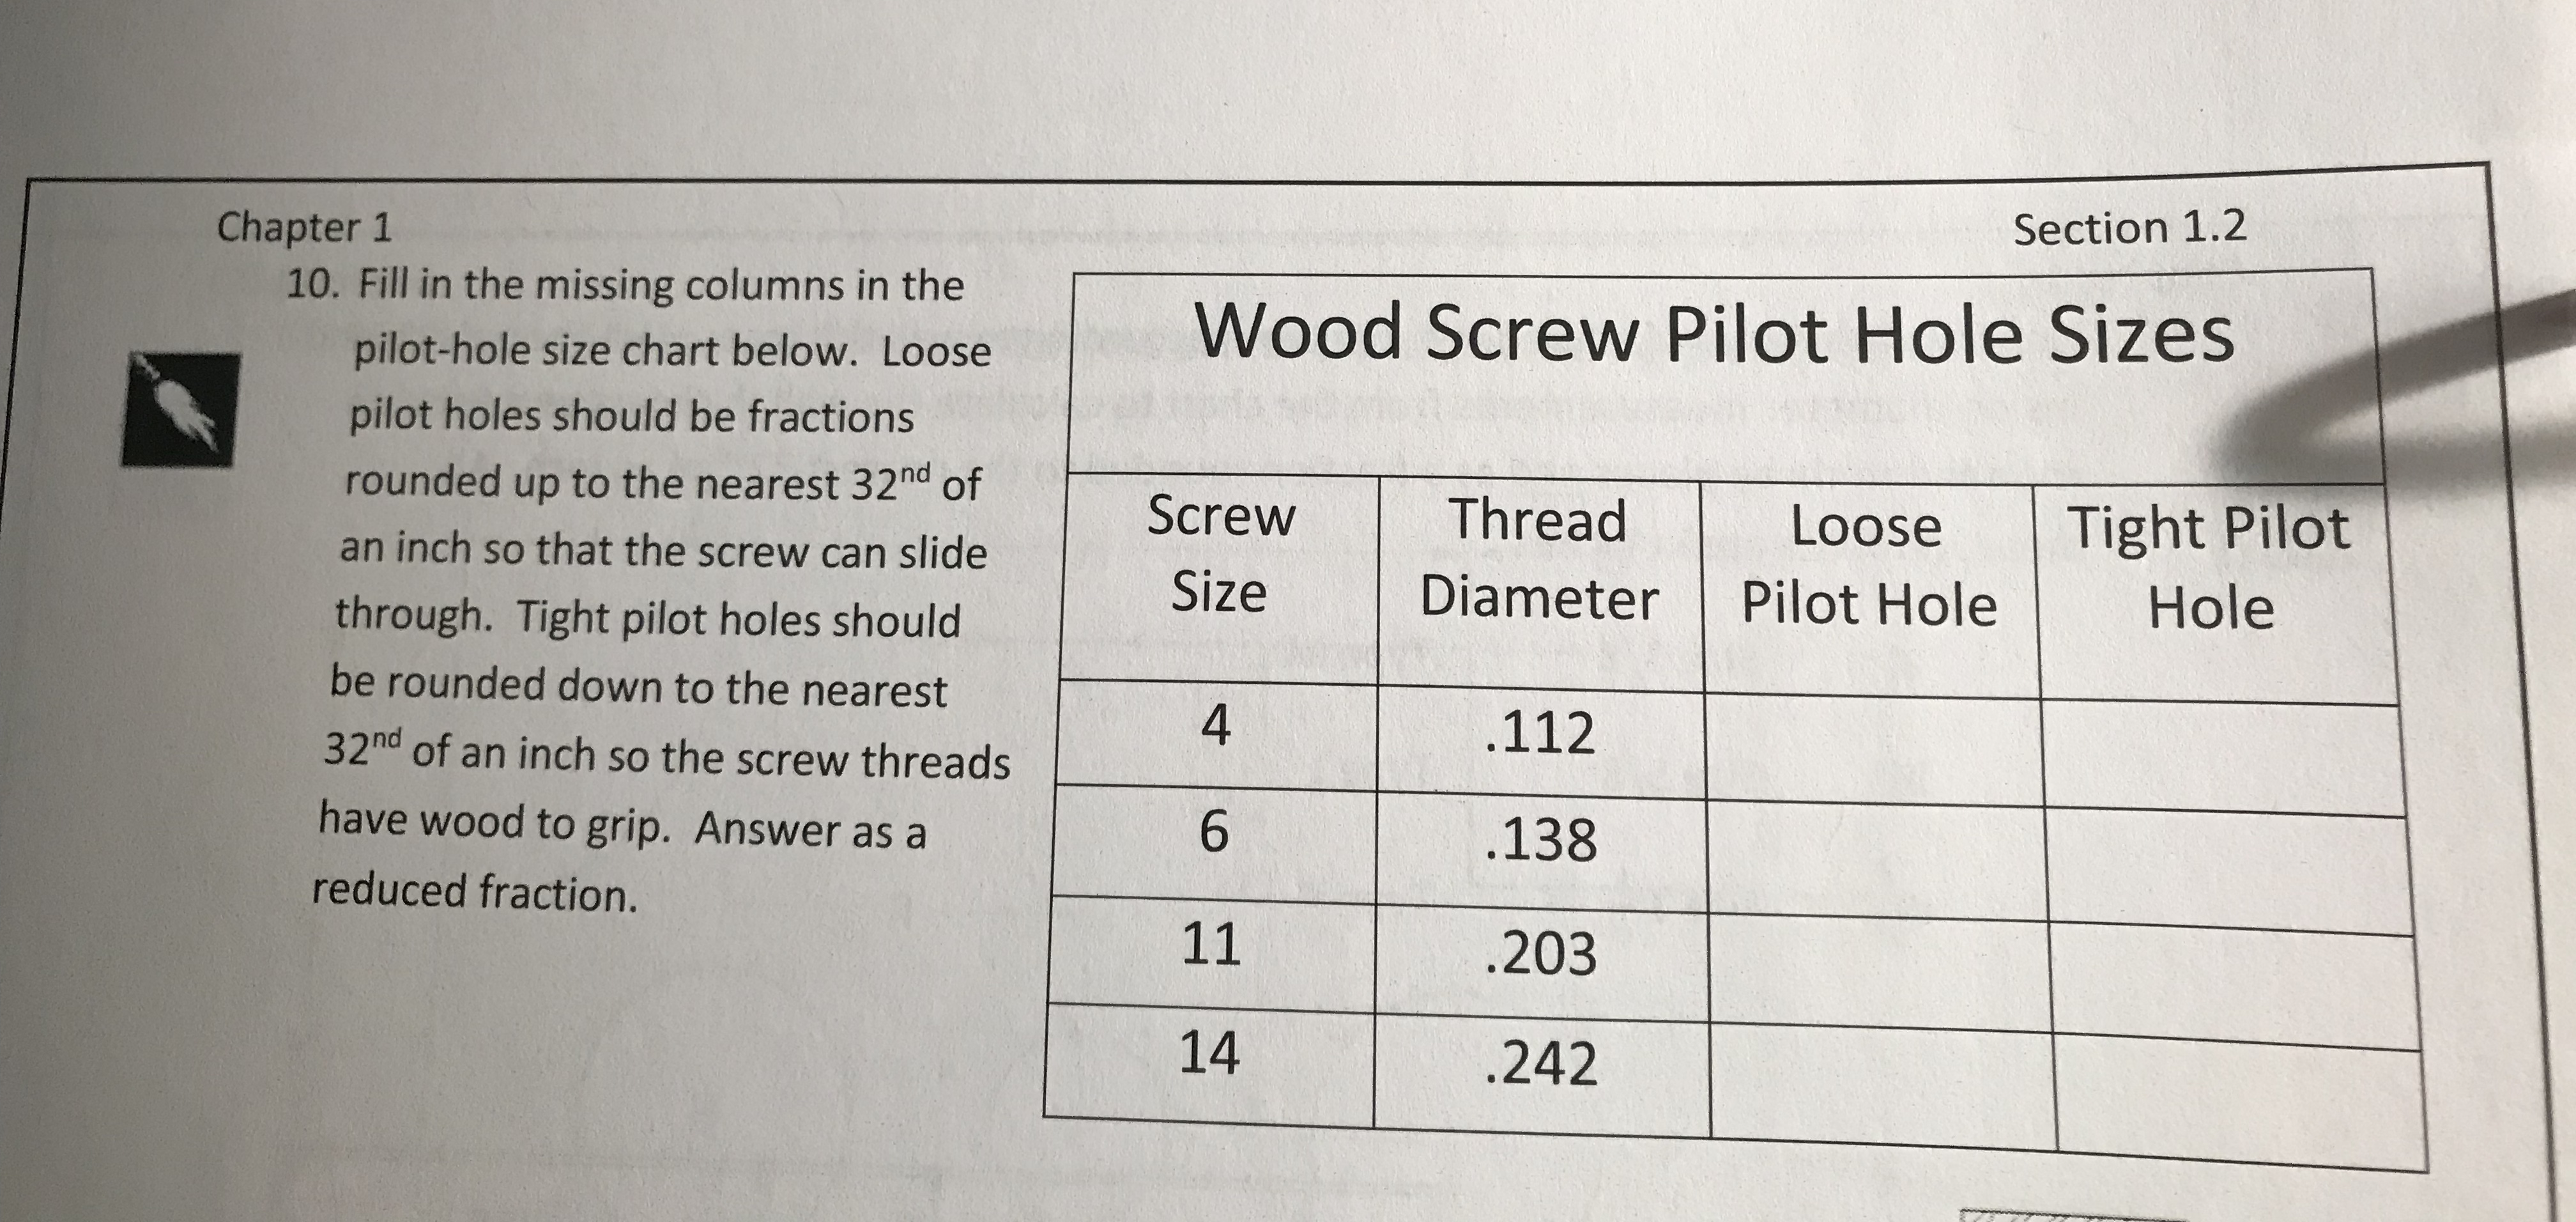 Section 1.2
Chapter 1
10. Fill in the missing columns in the
ole size chart below. LooseWood Screw Pilot Hole Sizes
pilot holes should be fractions
rounded up to the nearest 32M ofhread L
Screw Thread
Size Diameter Pilot Hole Hole
Loose Tight Pilot
an inch so that the screw can slide
through. Tight pilot holes should
be rounded down to the nearest
32nd of an inch so the screw threads
have wood to grip. Answer as a
reduced fraction.
4
.112
138
.203
242
6
14
